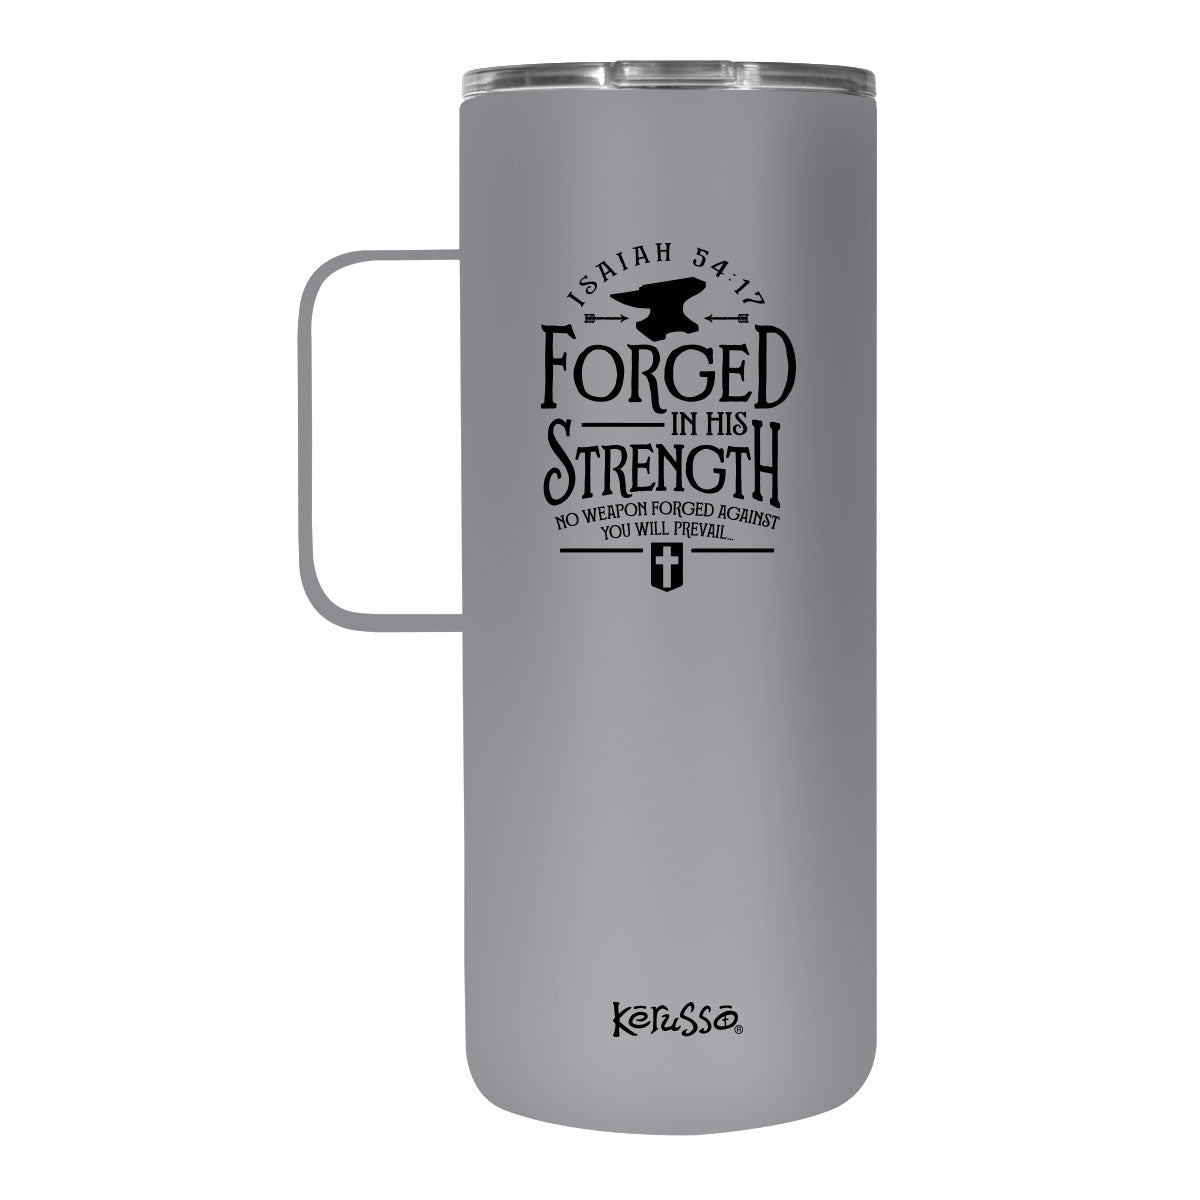 Kerusso Forged 22 oz Stainless Steel Tumbler With Handle | 2FruitBearers